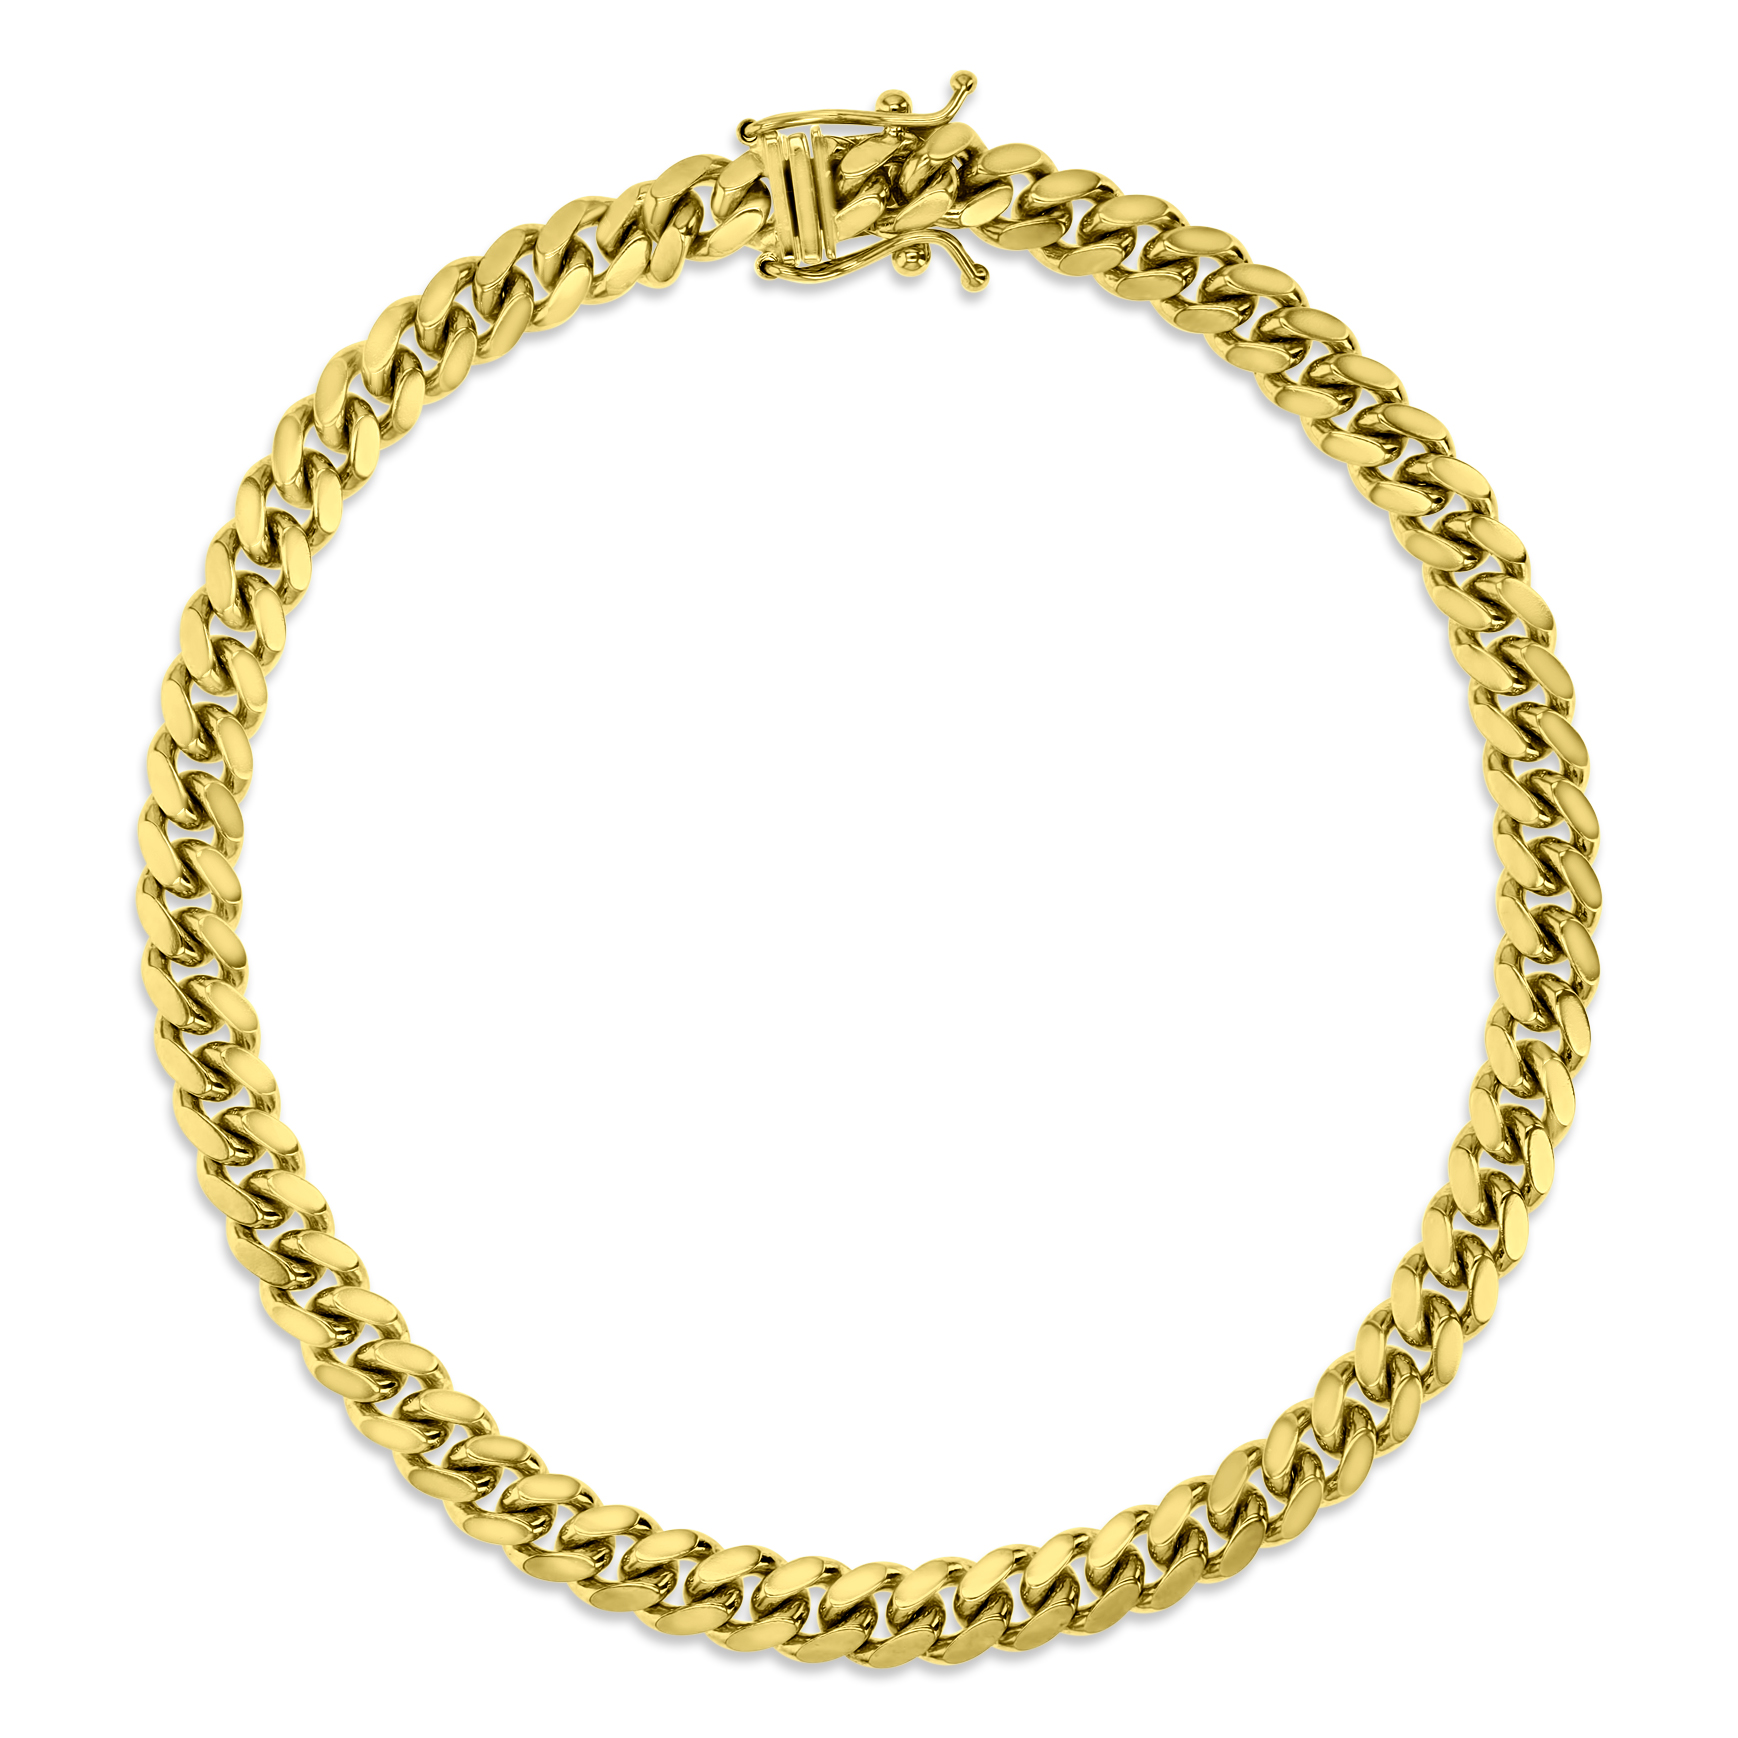 14K Yellow Gold 5mm Solid Miami Cuban 150 8" Chain Bracelet With Box Lock